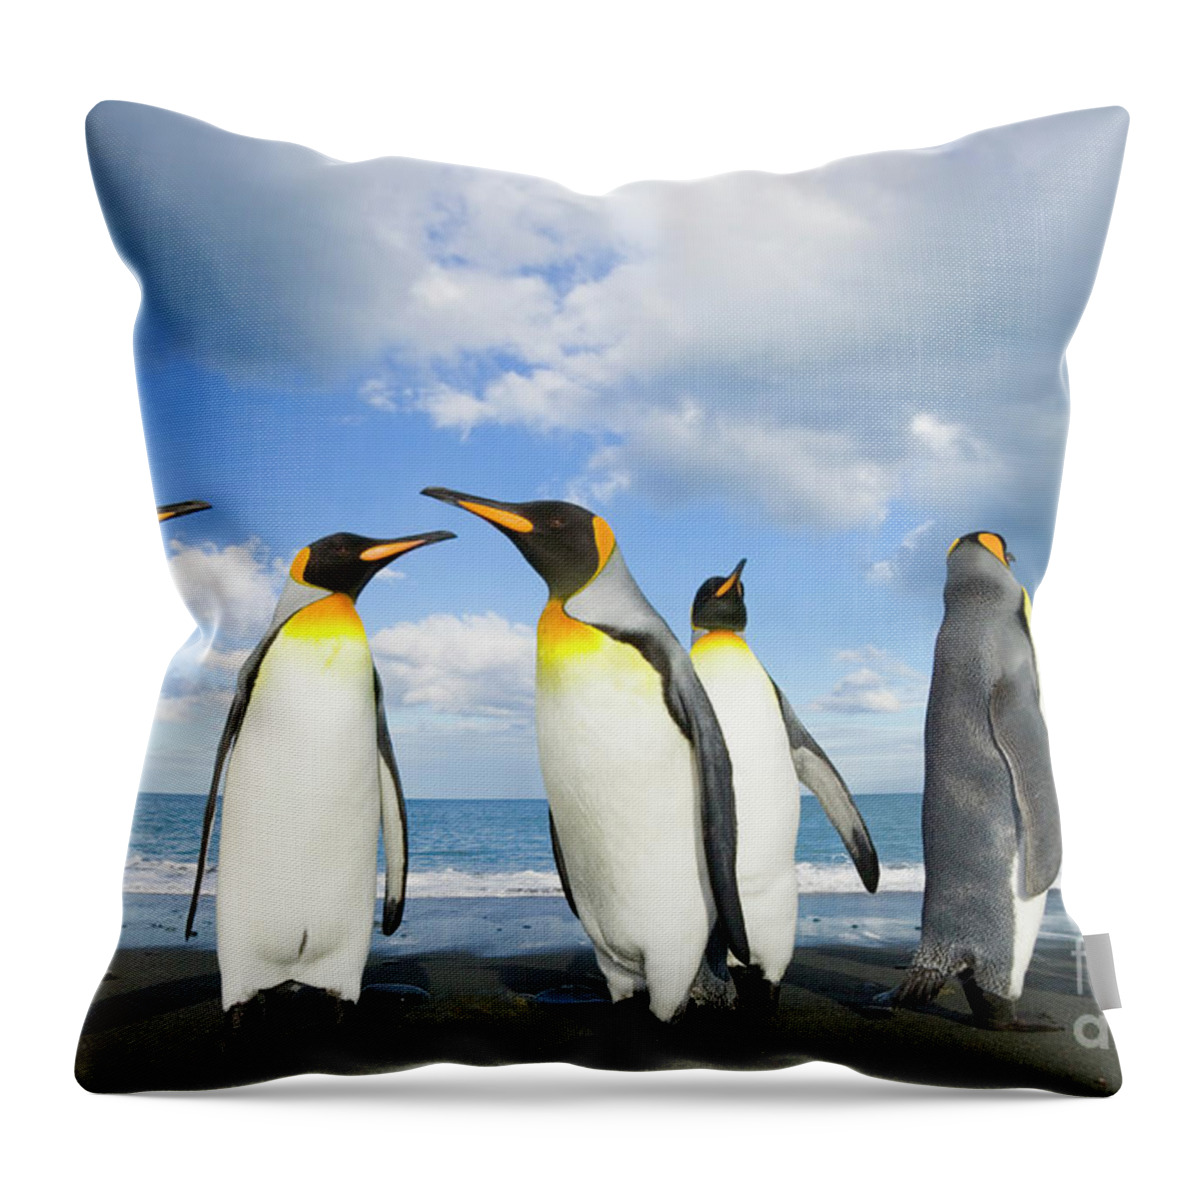 00345362 Throw Pillow featuring the photograph King Penguins in Gold Harbour by Yva Momatiuk John Eastcott